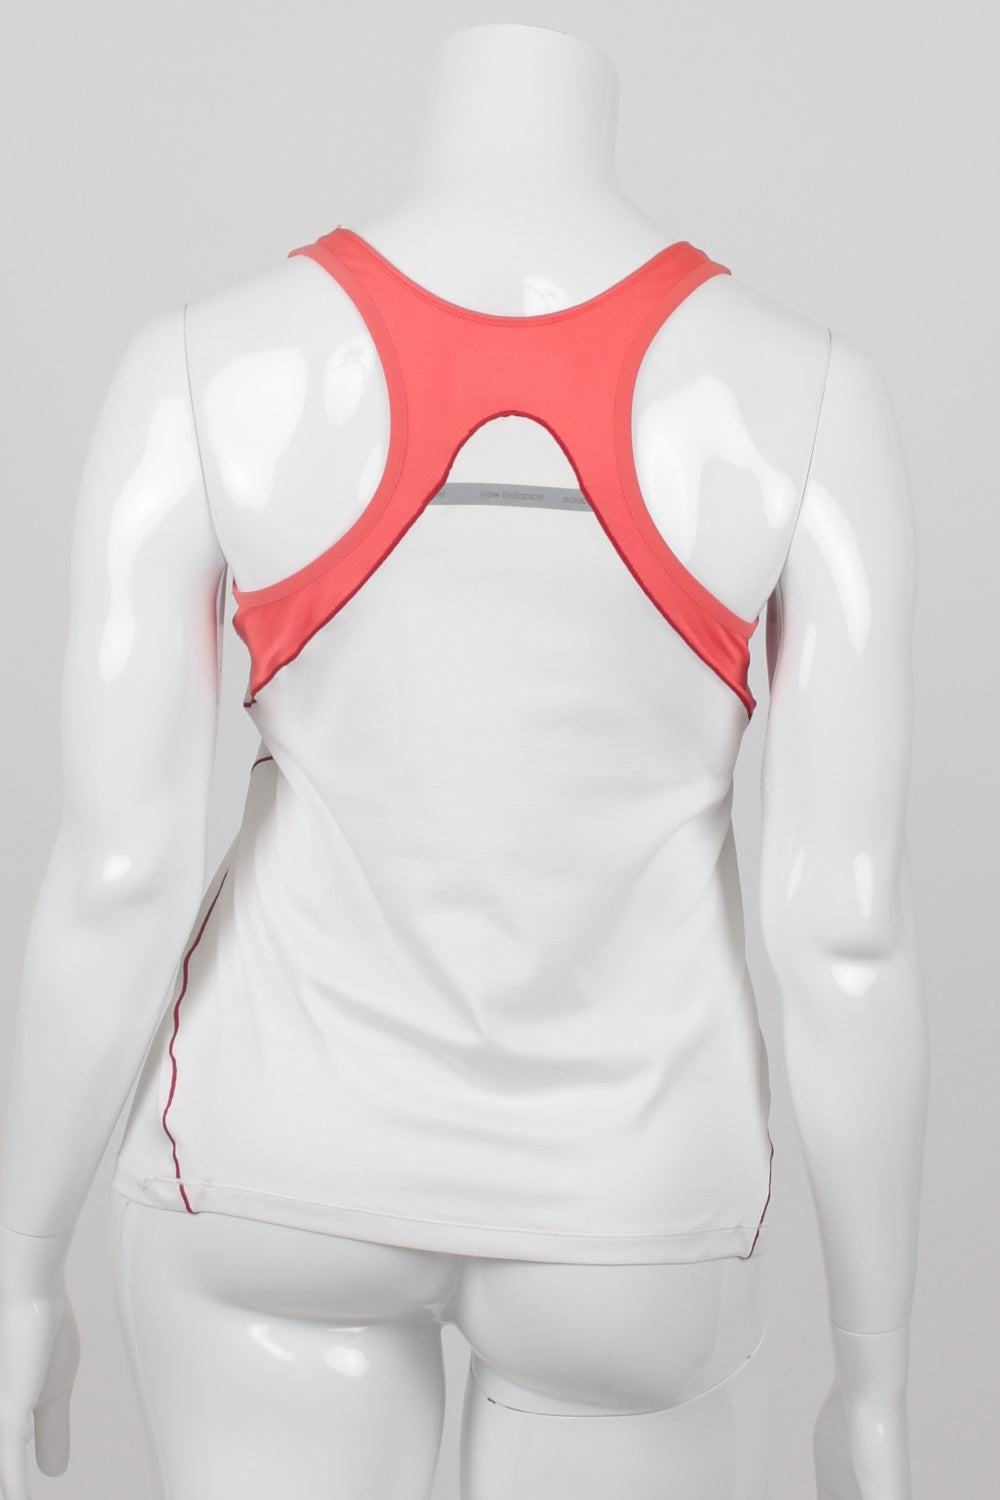 New Balance White and Pink Active Tank L